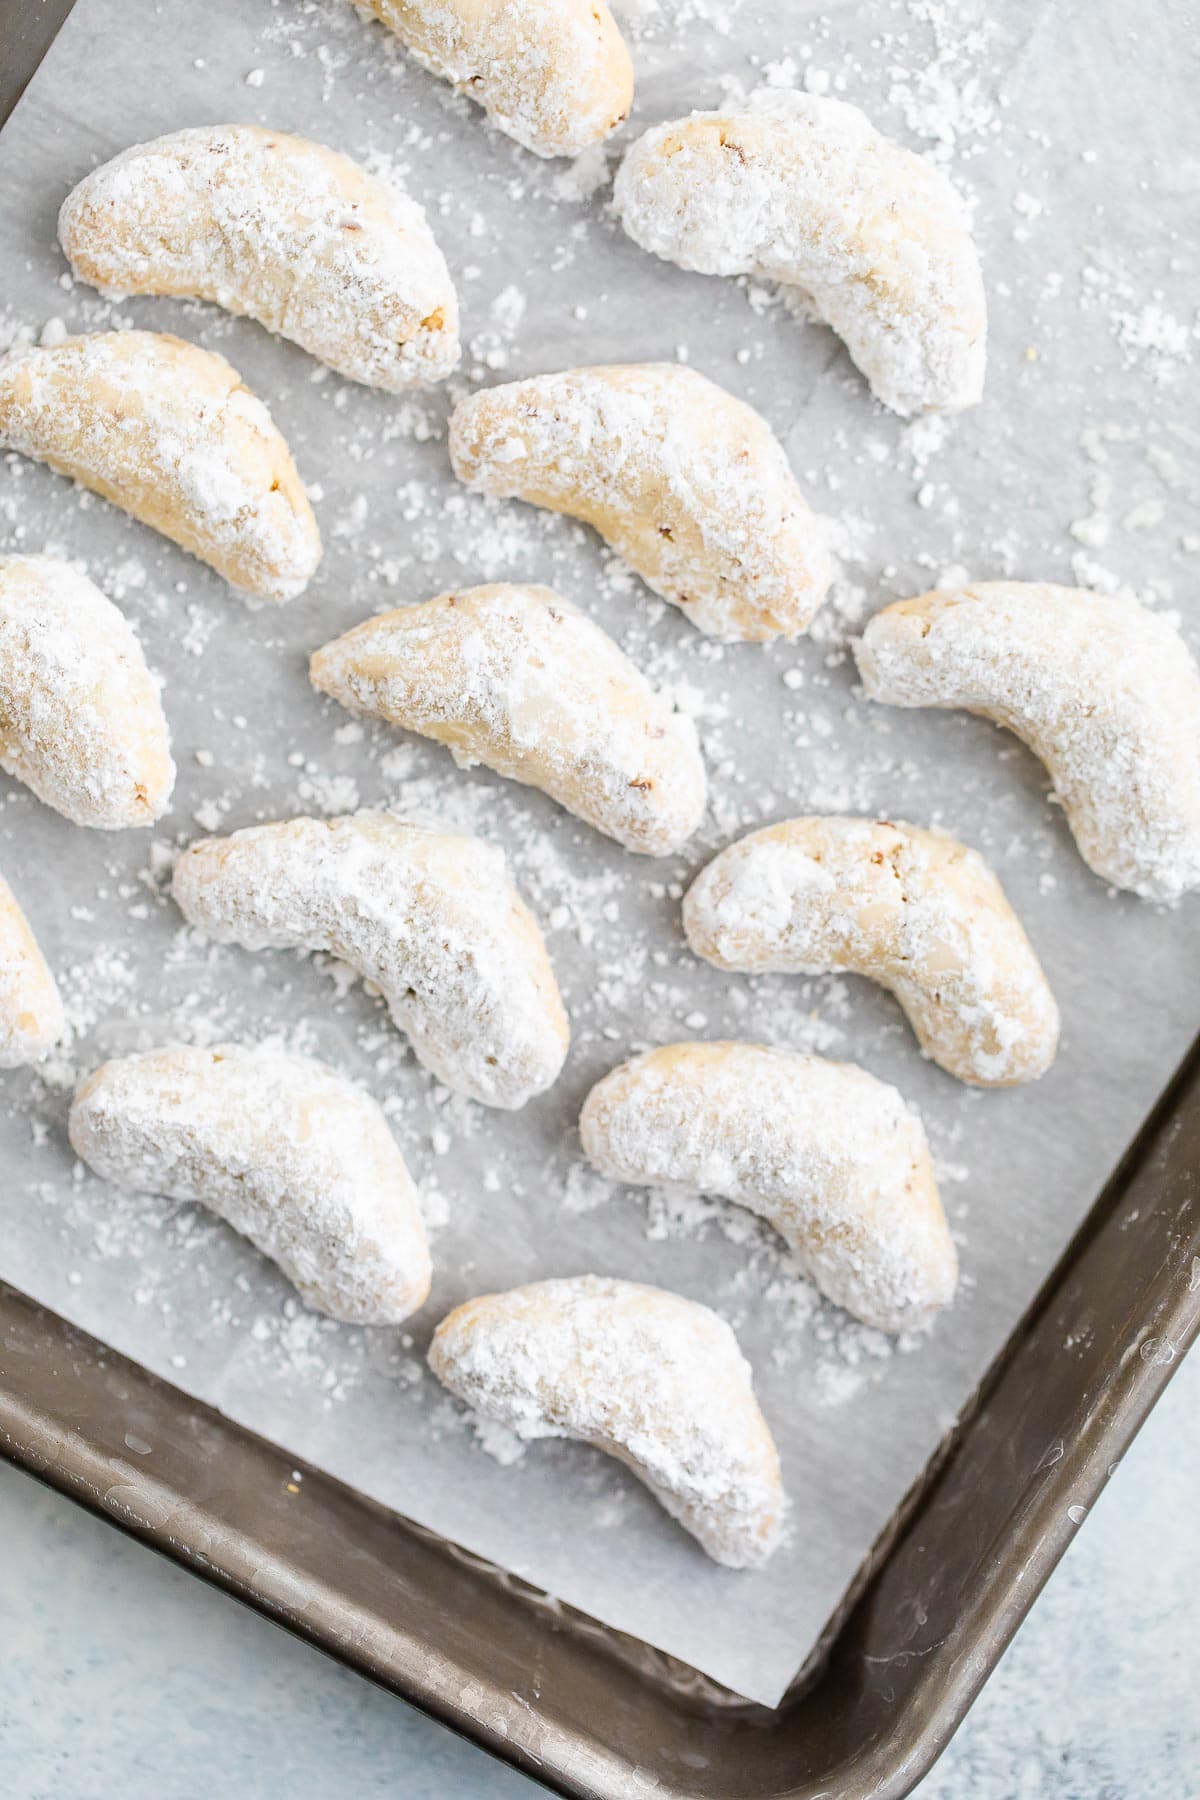 Baked and coated almond crescent cookies on a baking sheet lined with parchment paper.